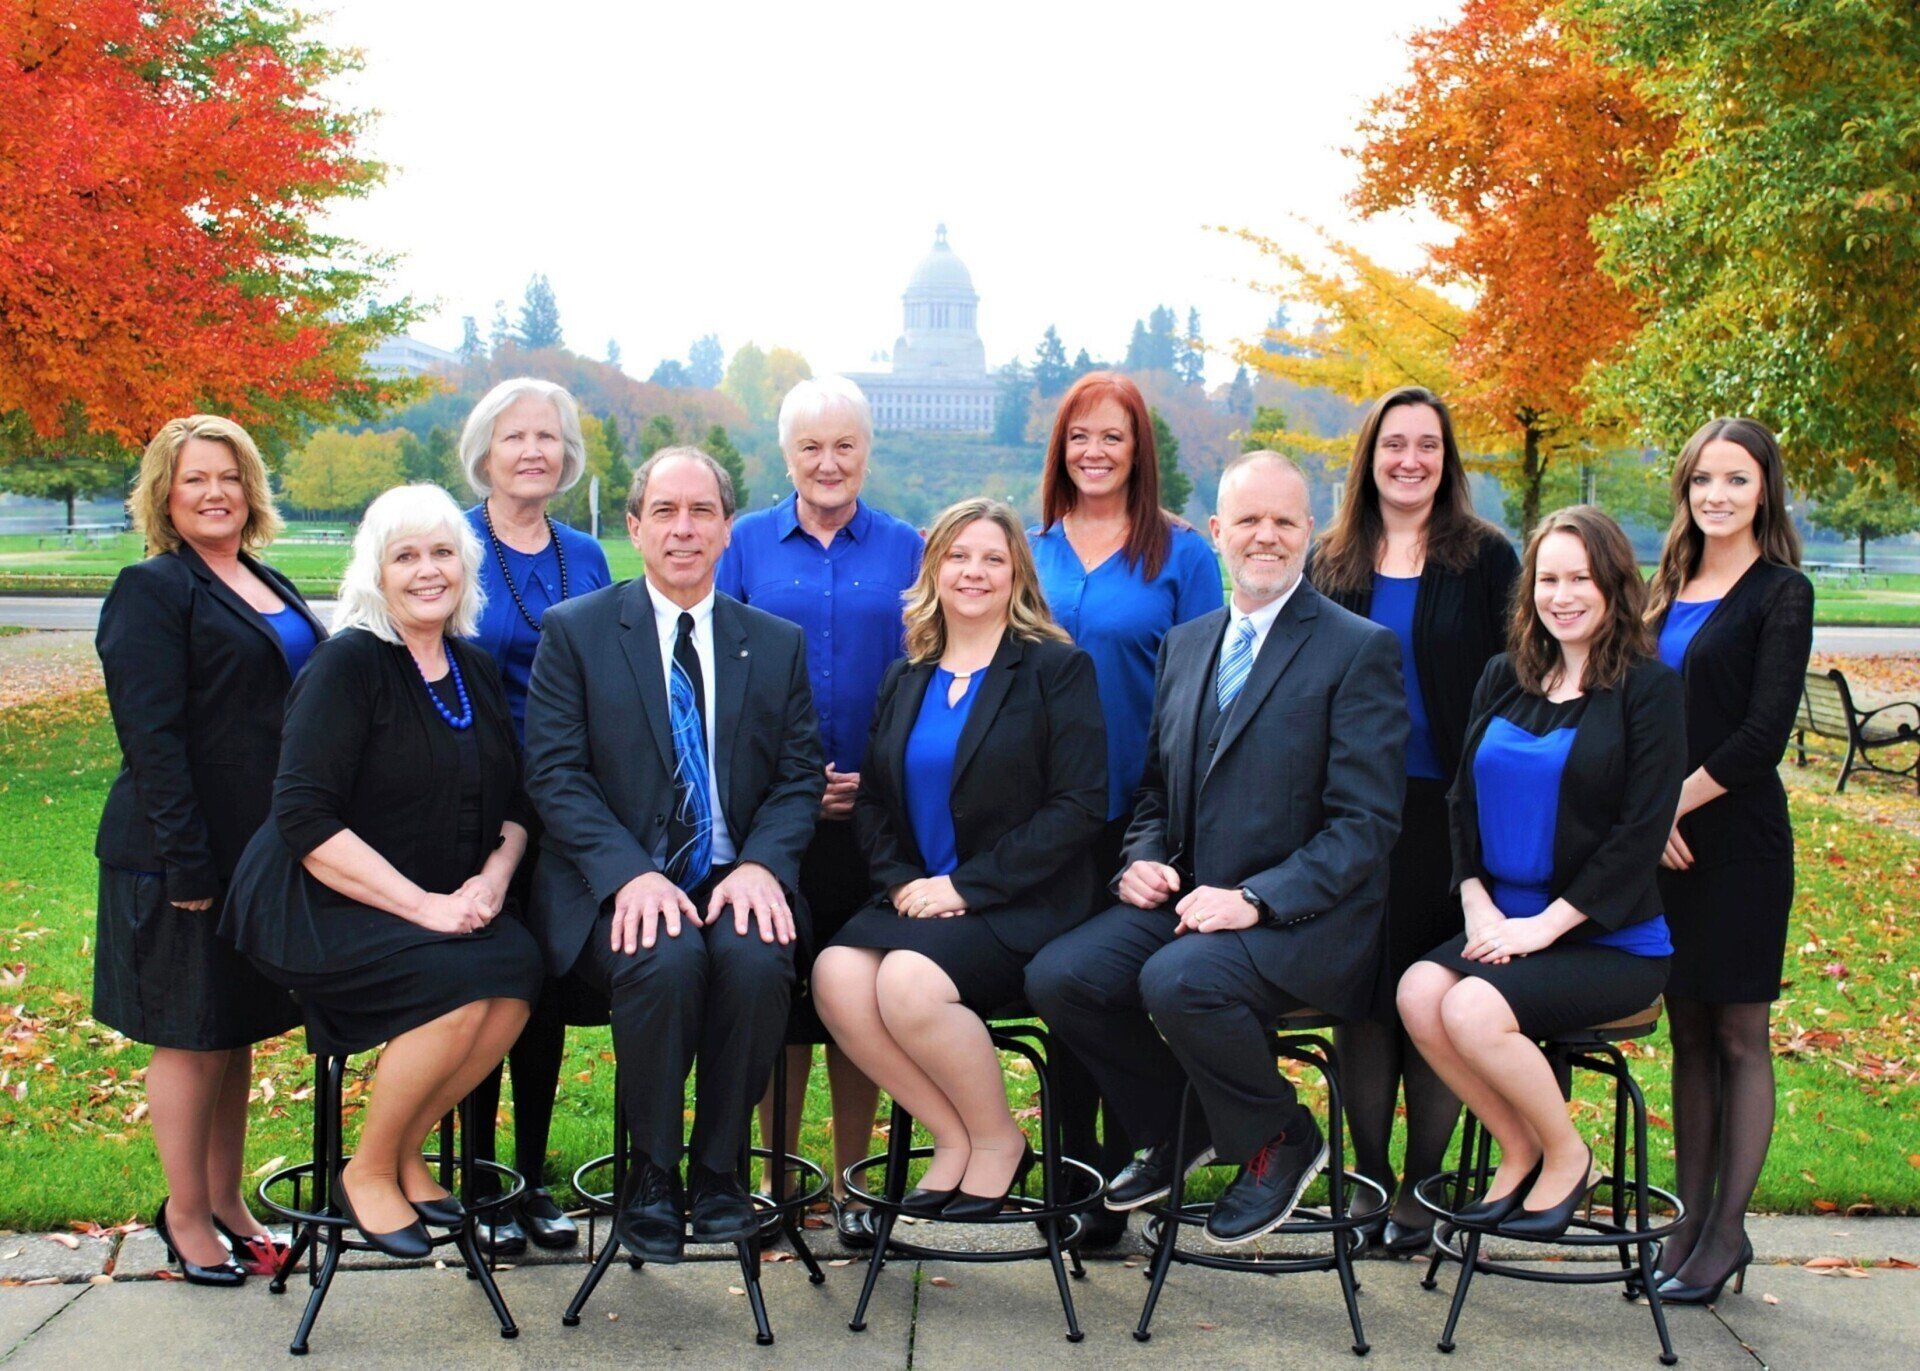 Meet the team behind the success of Bliss & Tuttle CPA in Olympia, WA